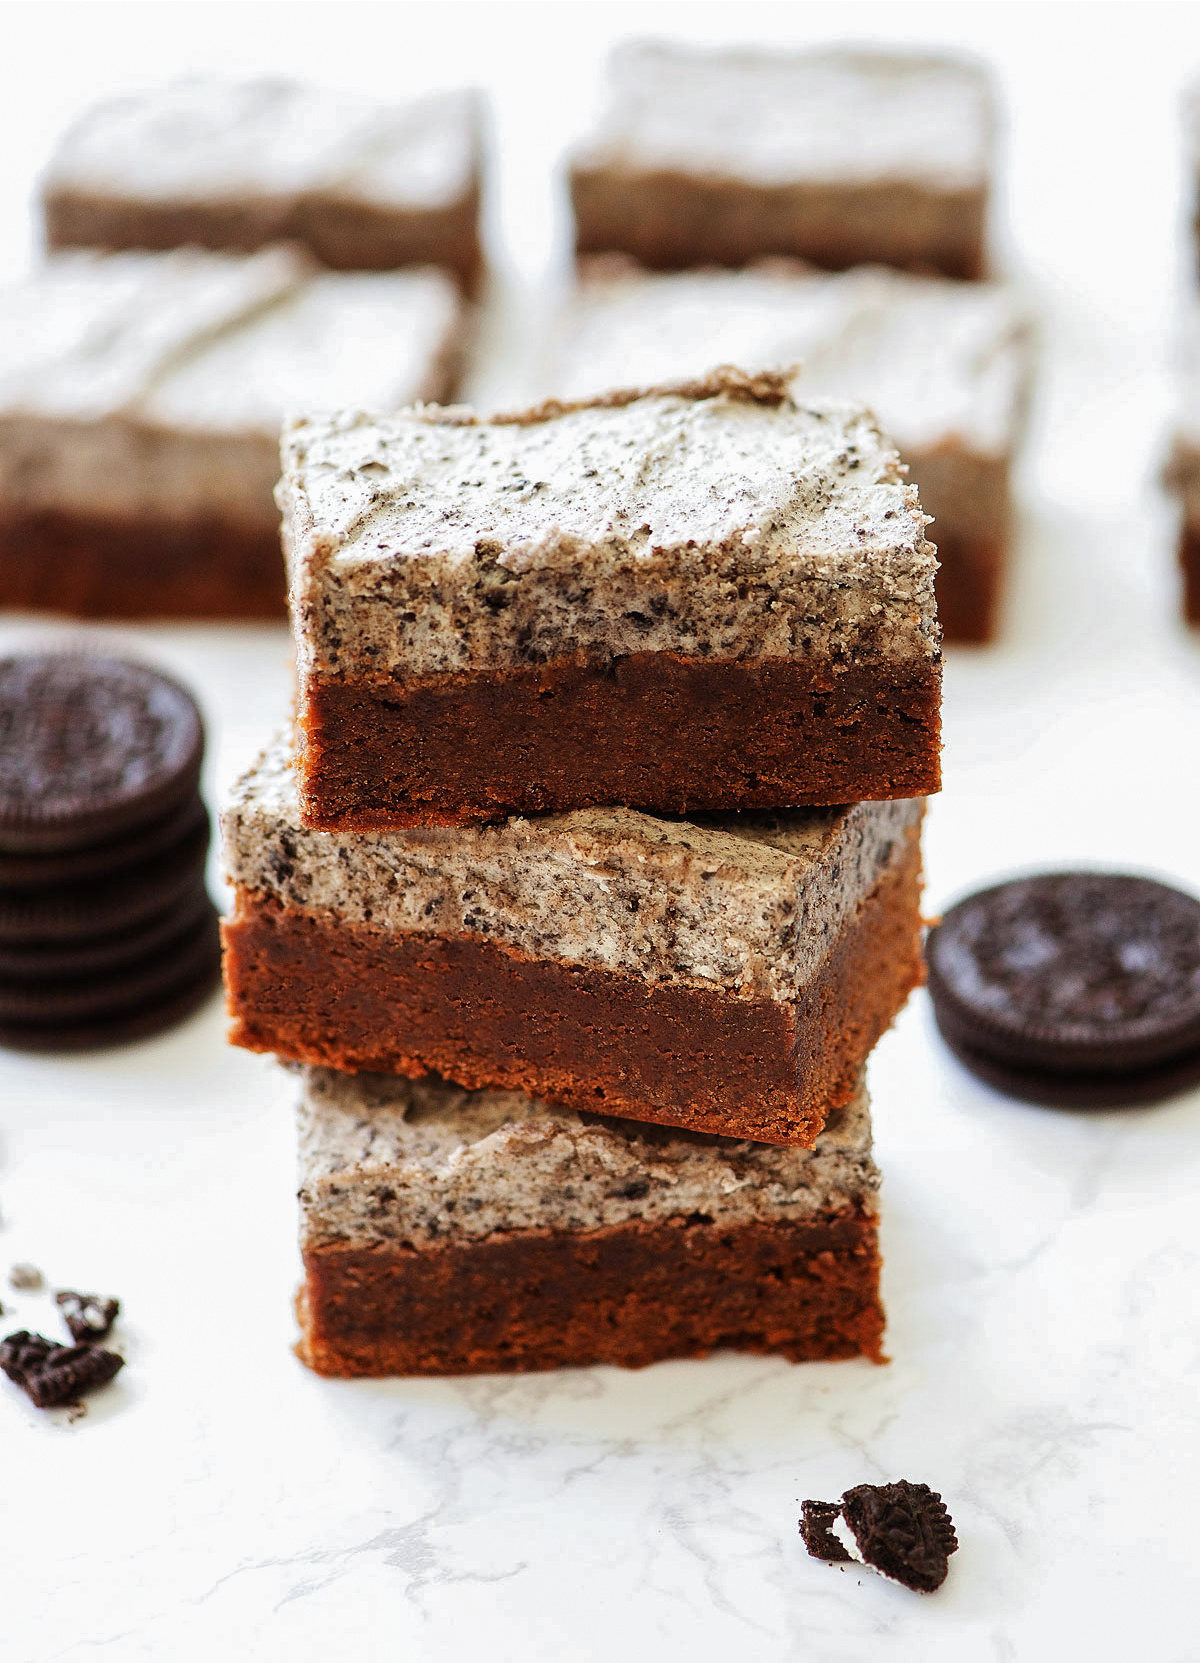 Cookies and Cream Brownies are chocolate fudge brownies slathered with a creamy Oreo frosting. Life-in-the-Lofthouse.com